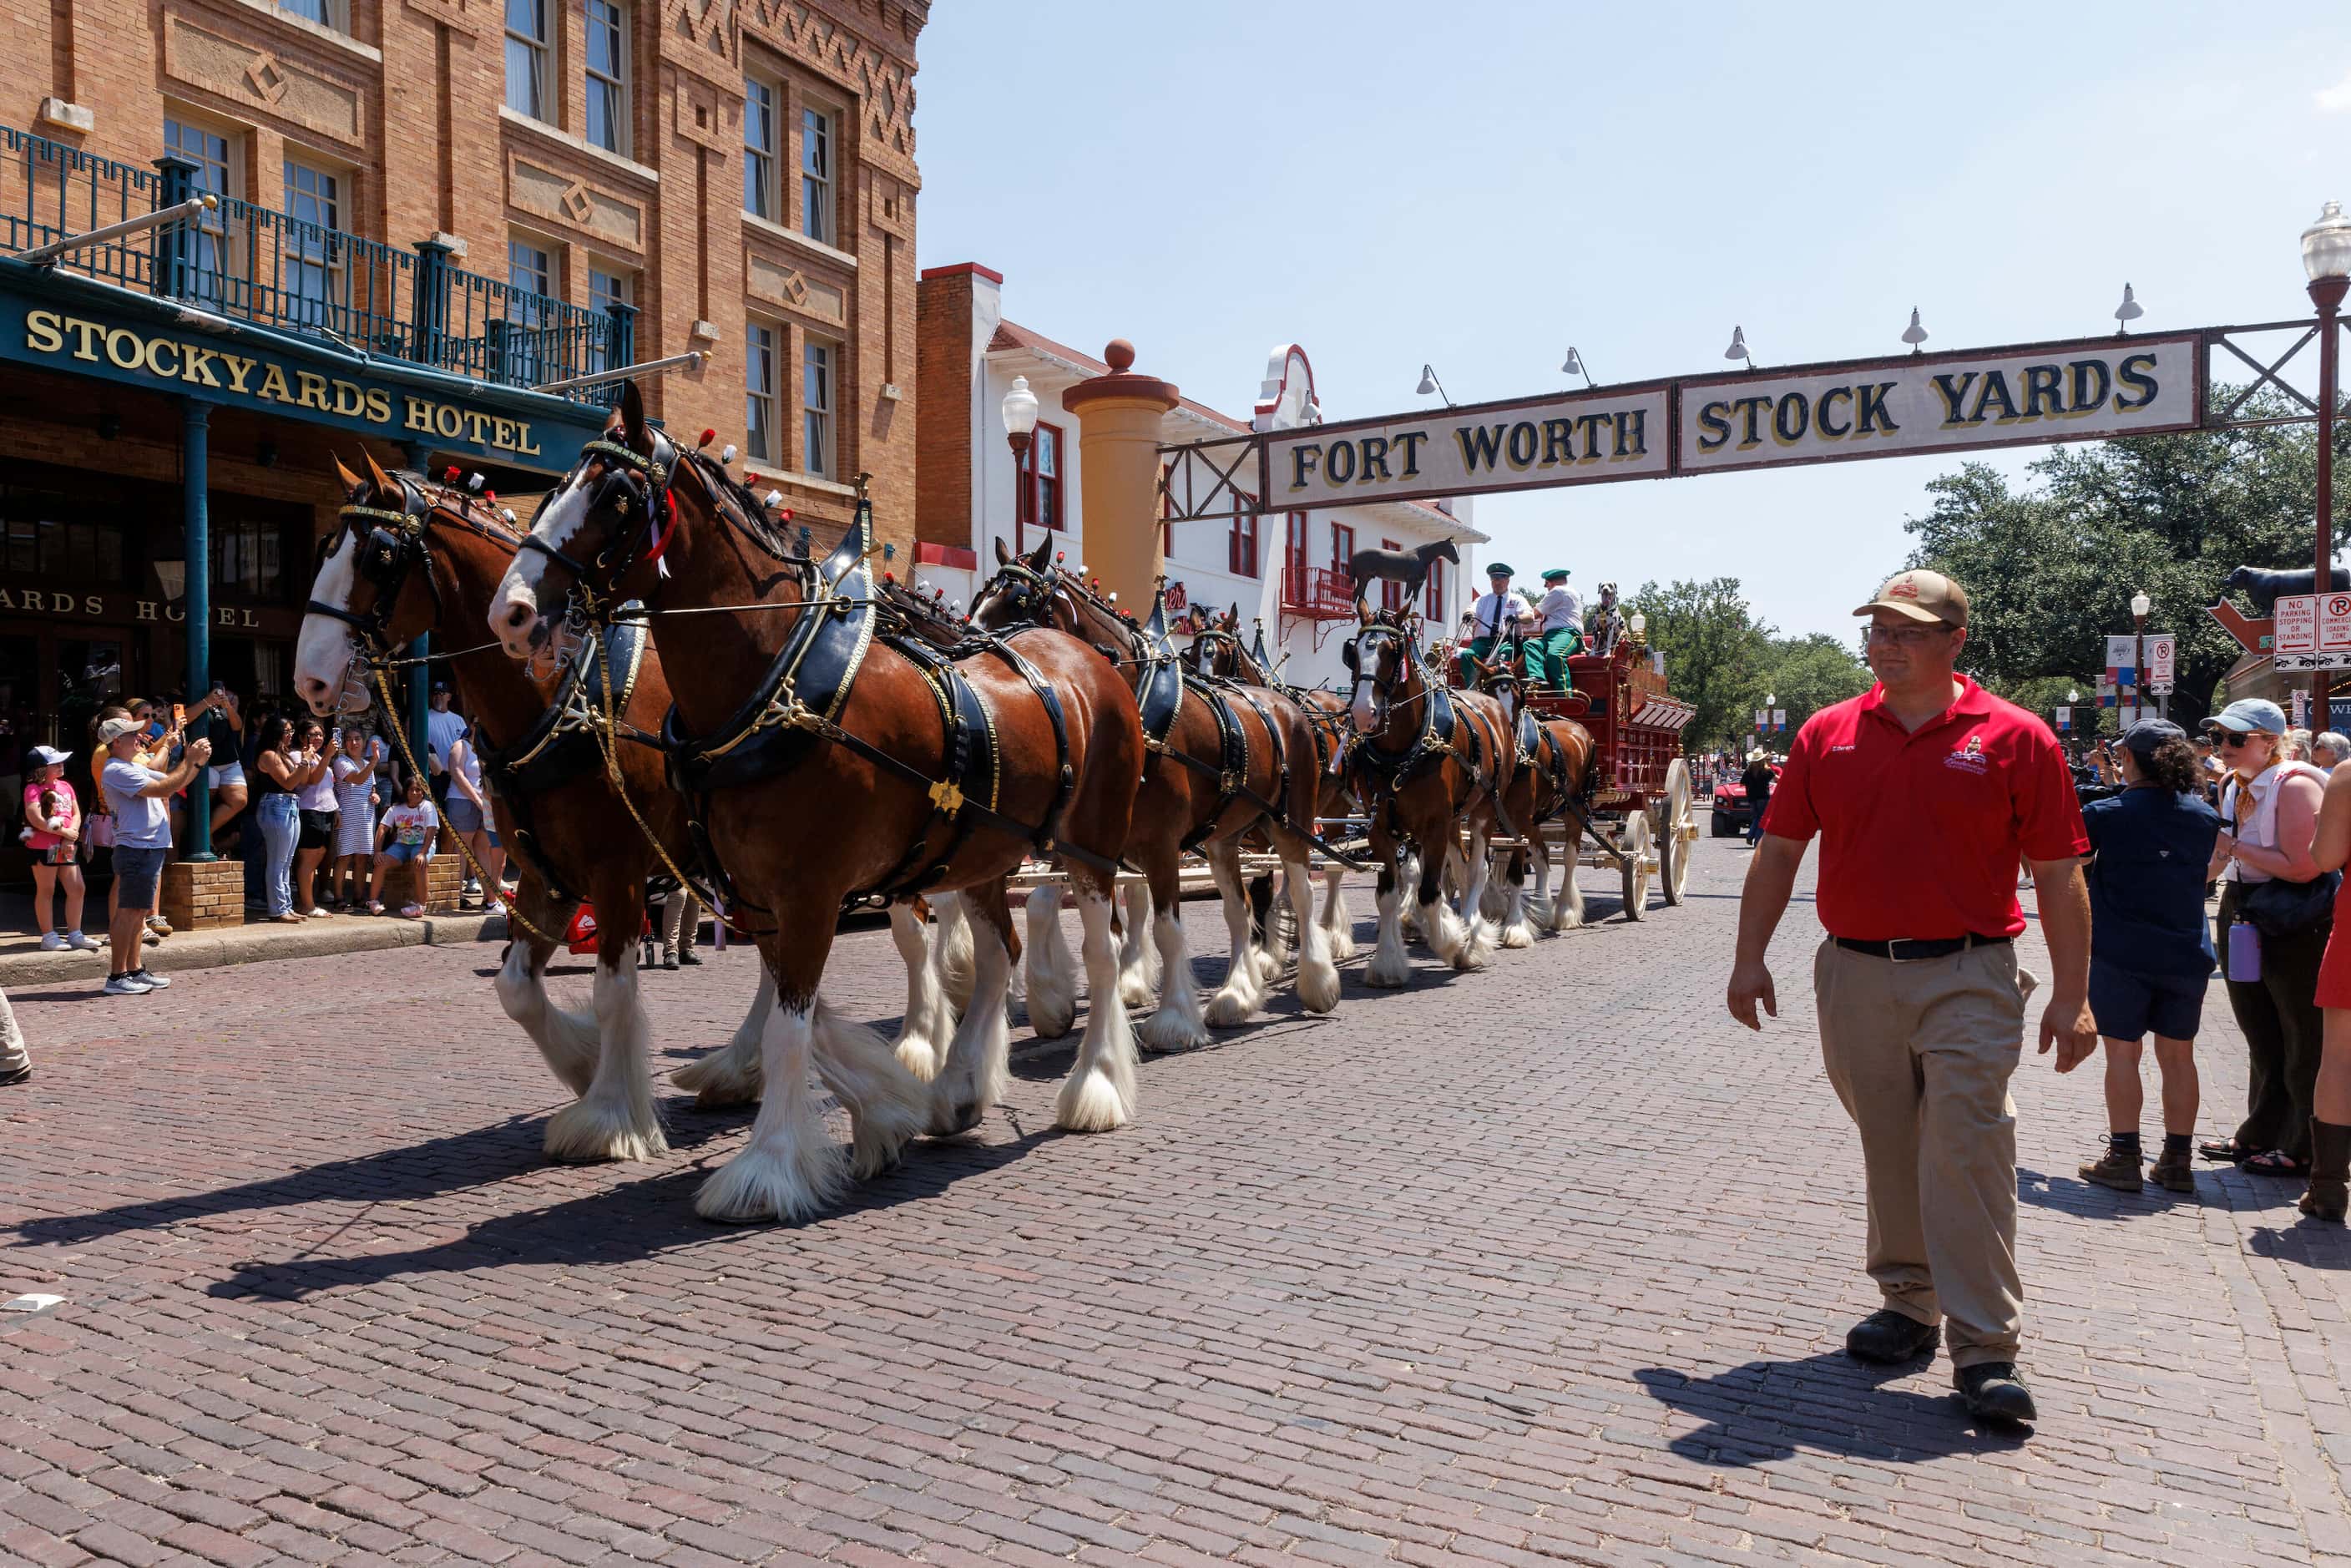 The Budweiser Clydesdales pass the Stockyards Hotel as they make an old-school beer delivery...